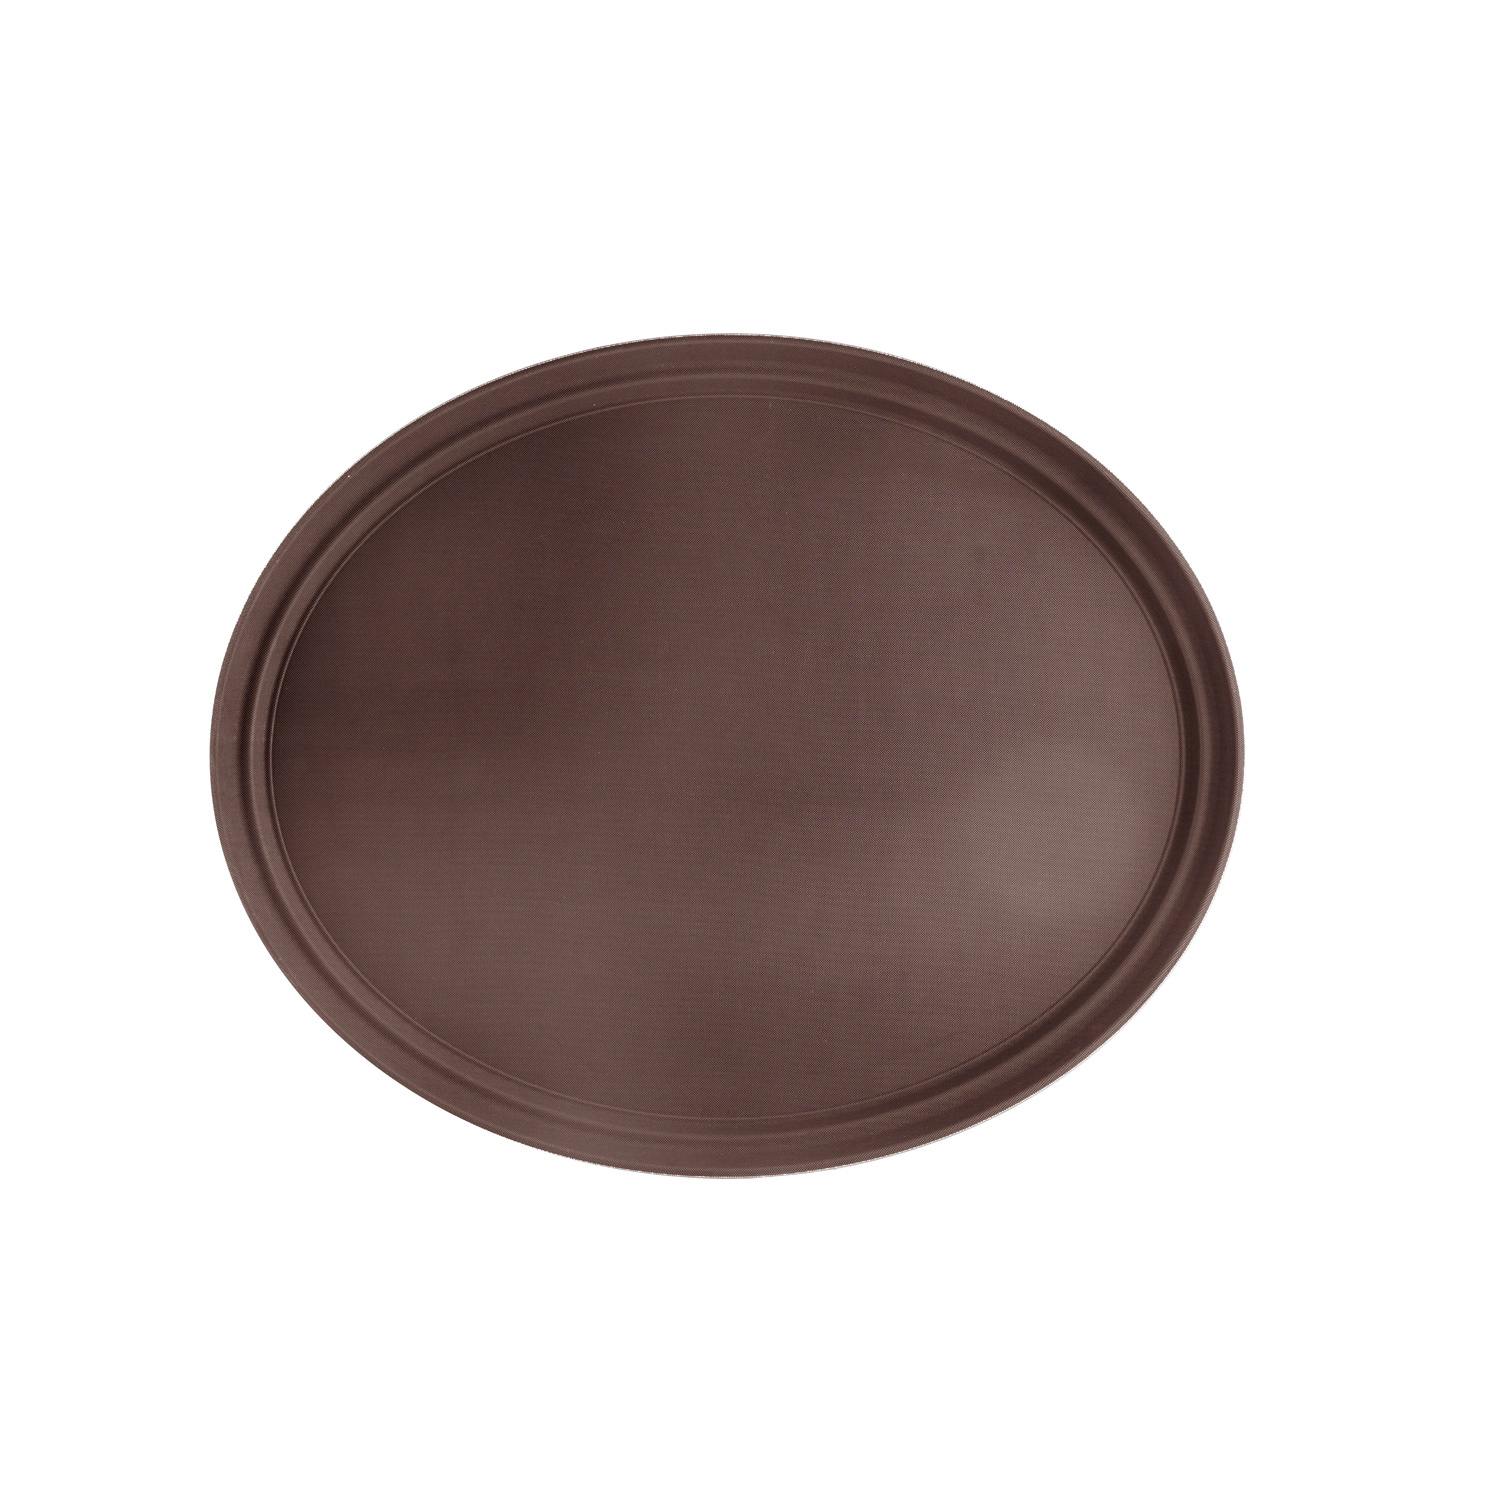 CAC China PDTO-2722BN Brown Plastic Oval Super Tray 27" x 22"